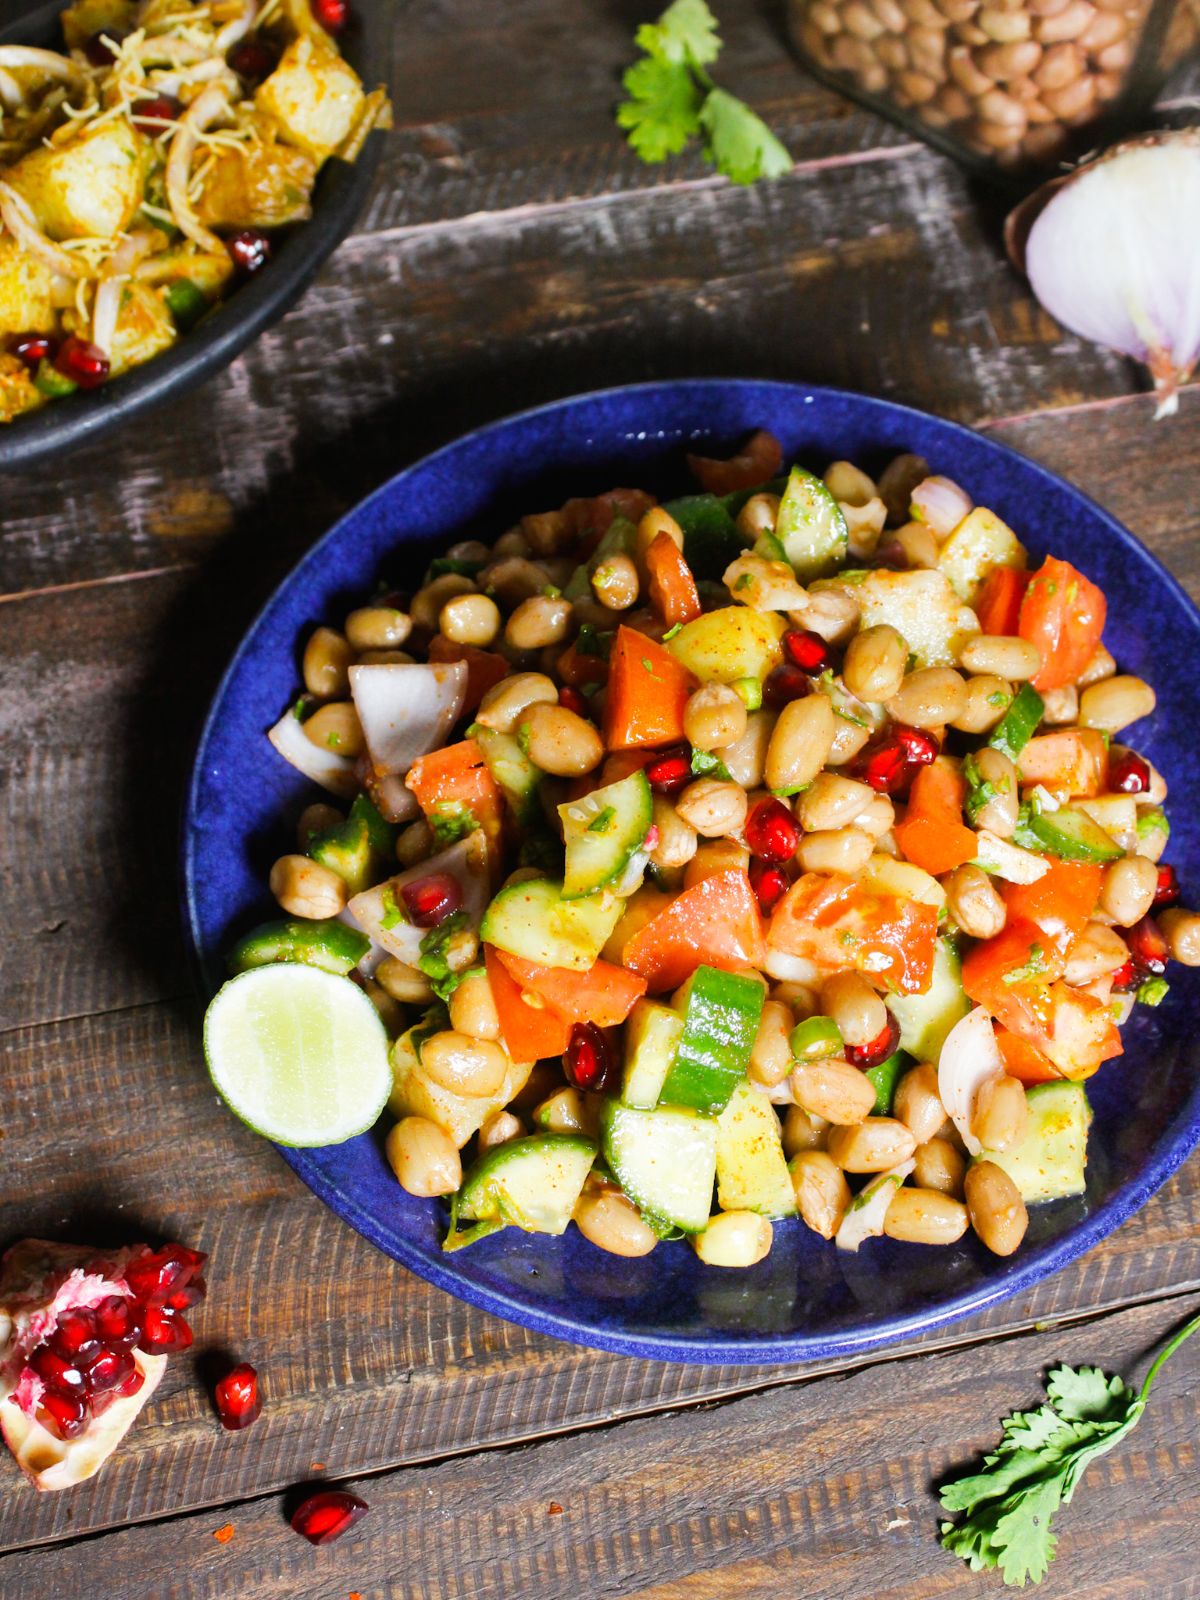 Super delicious Spicy Boiled Peanut Chaat